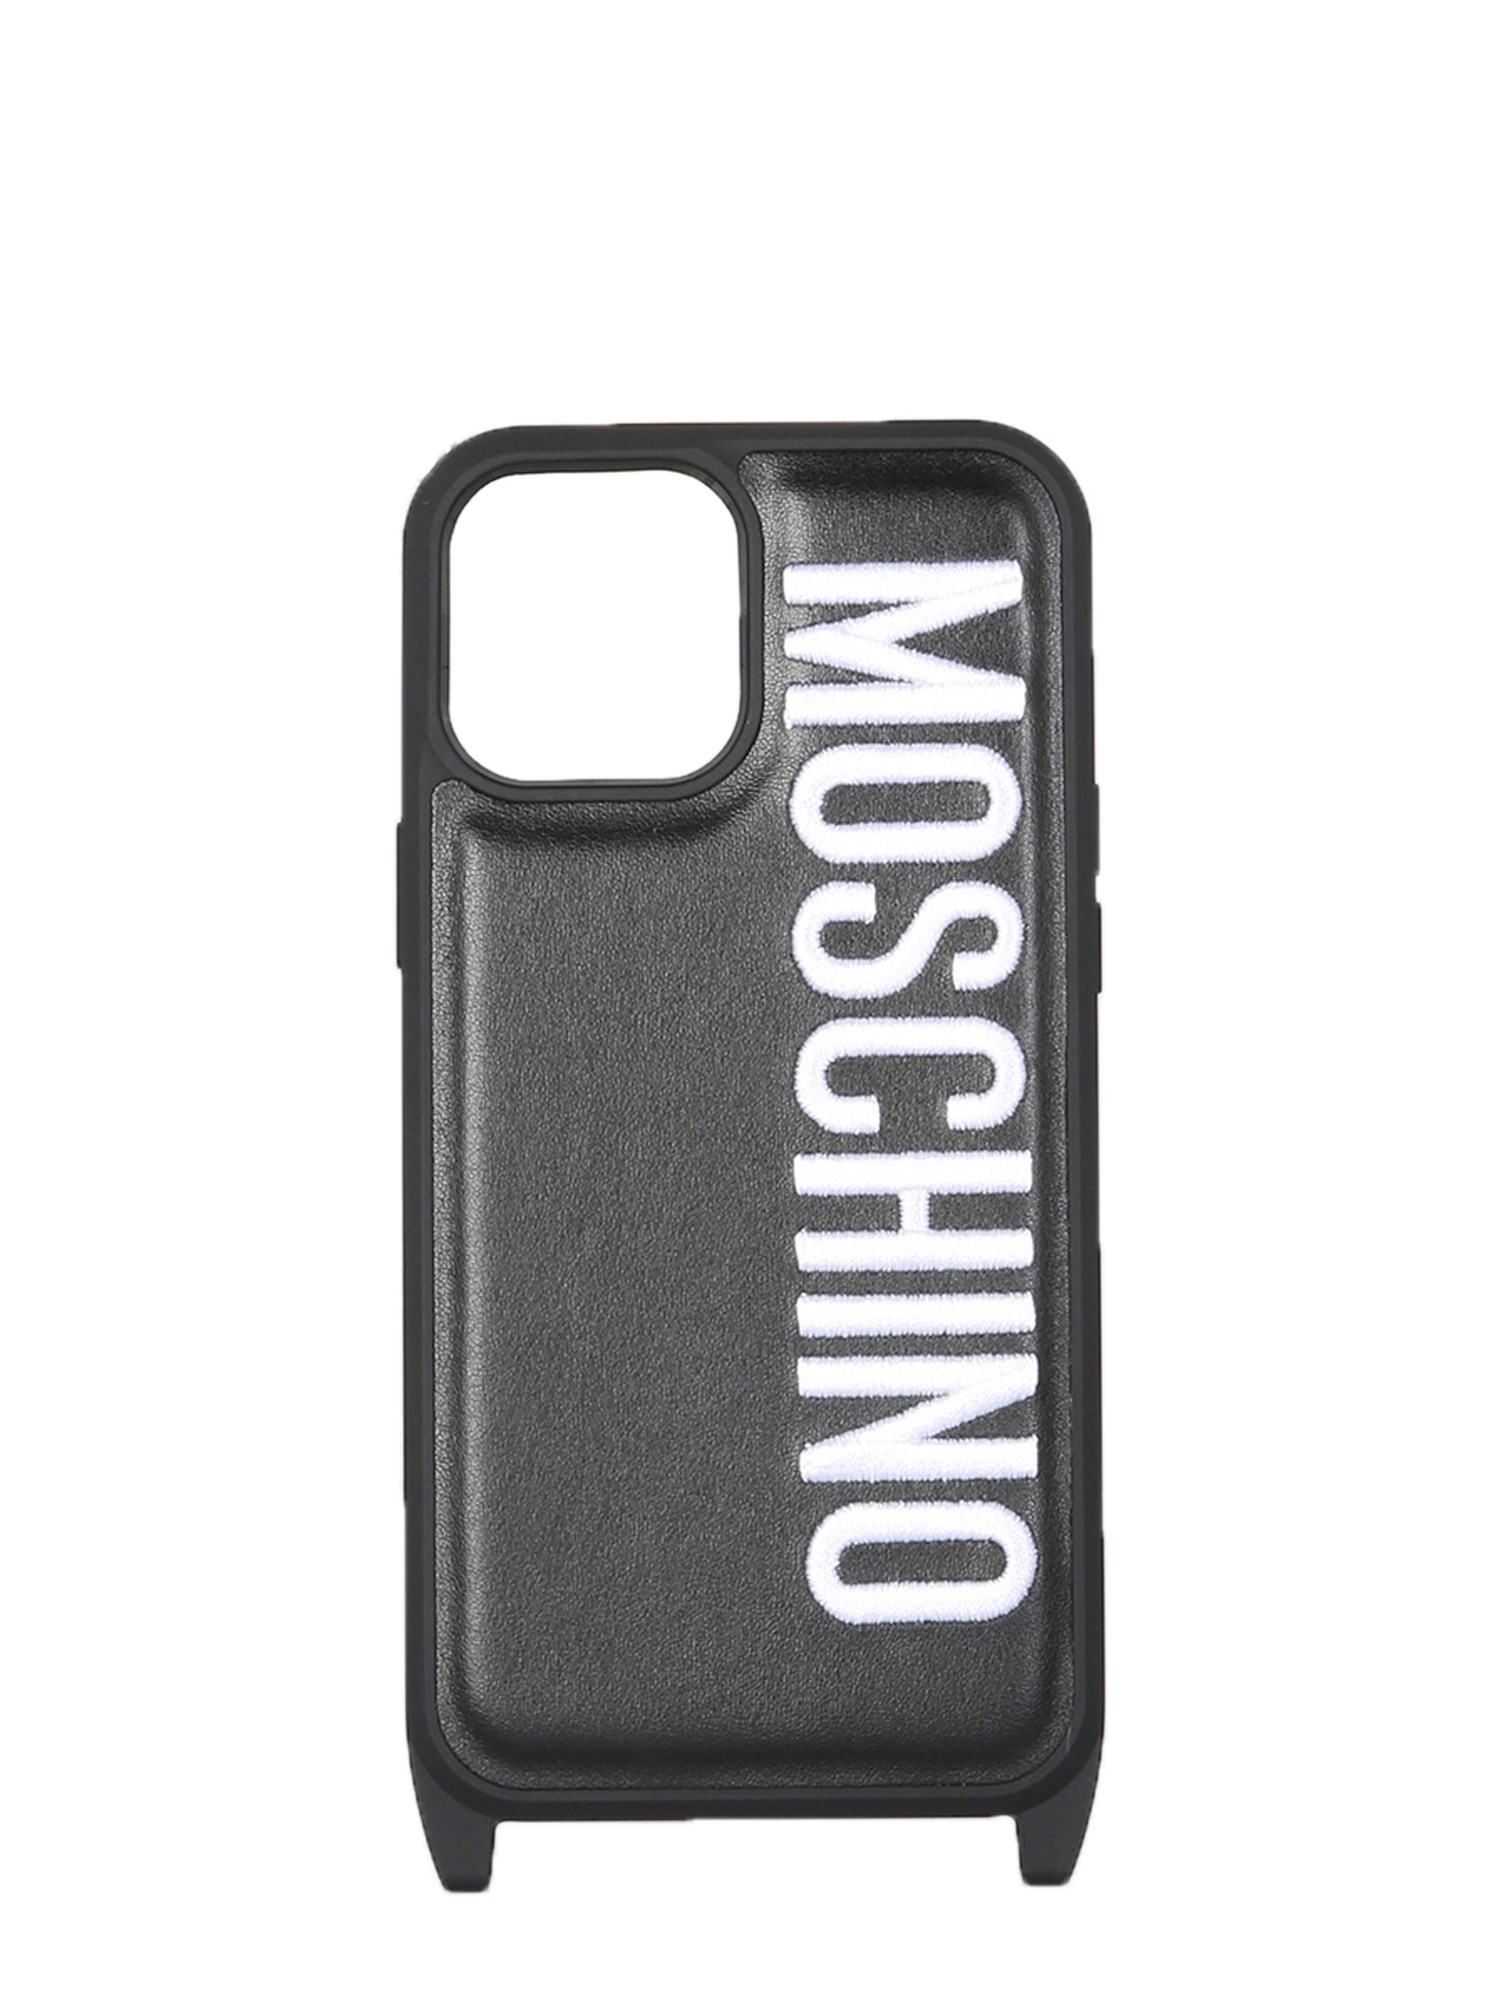 moschino iphone 12 pro max cover